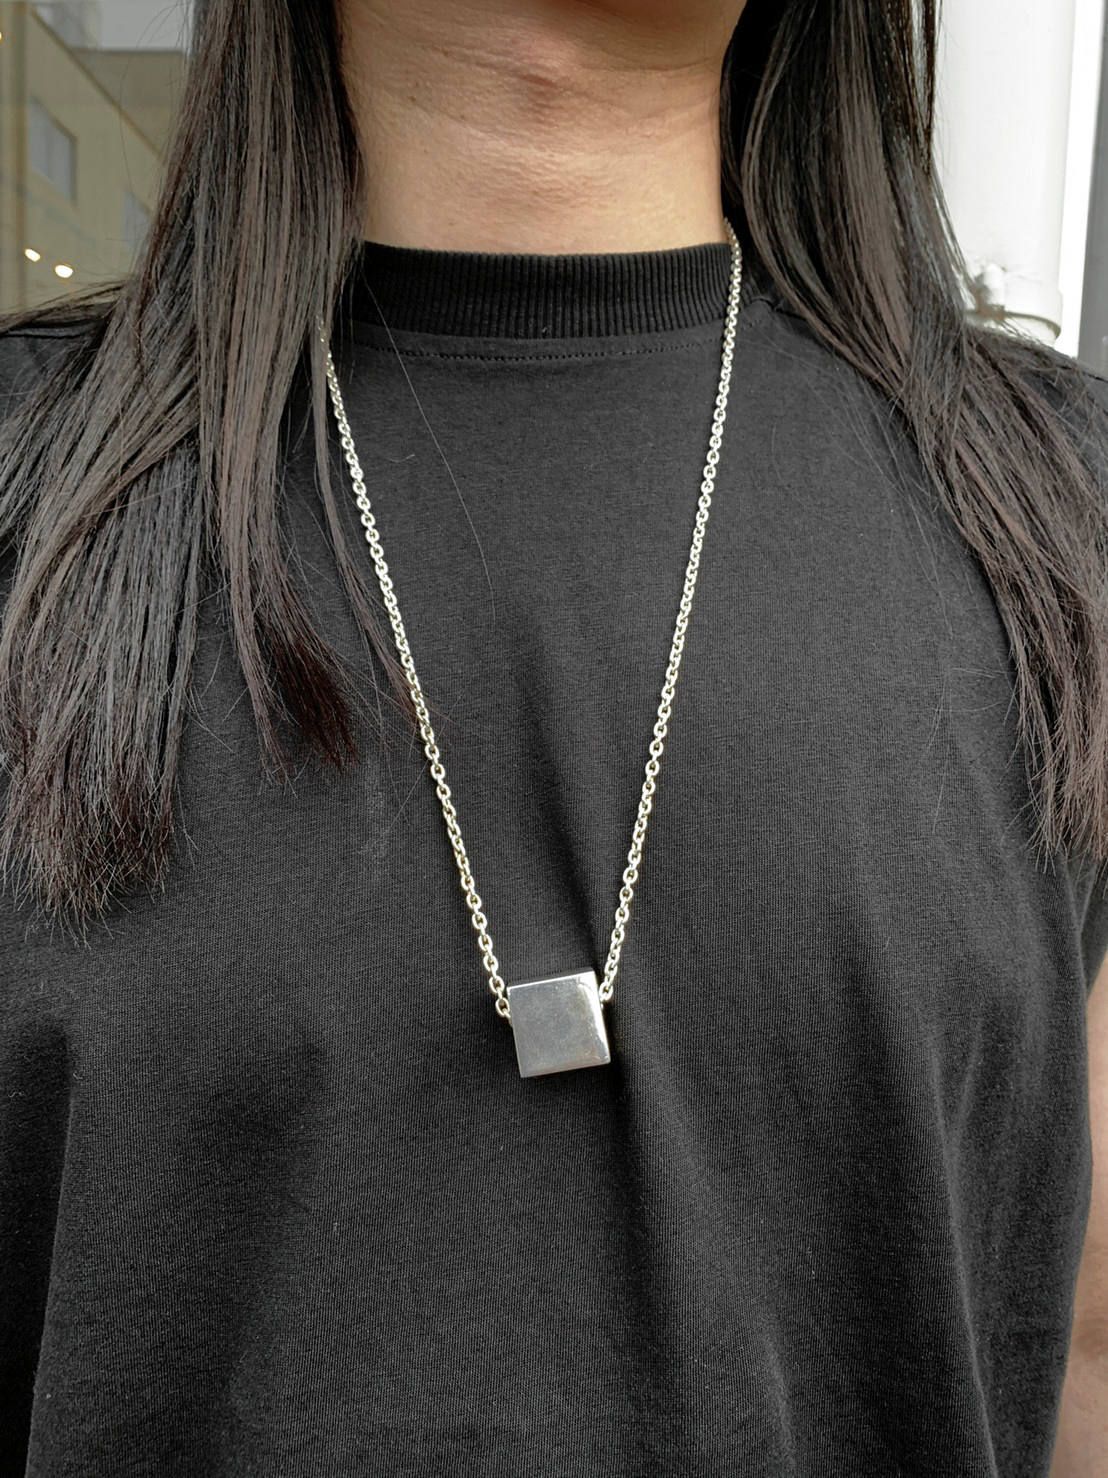 Parts of Four   キューブネックレス CUBE NECKLACE SILVER   STORY